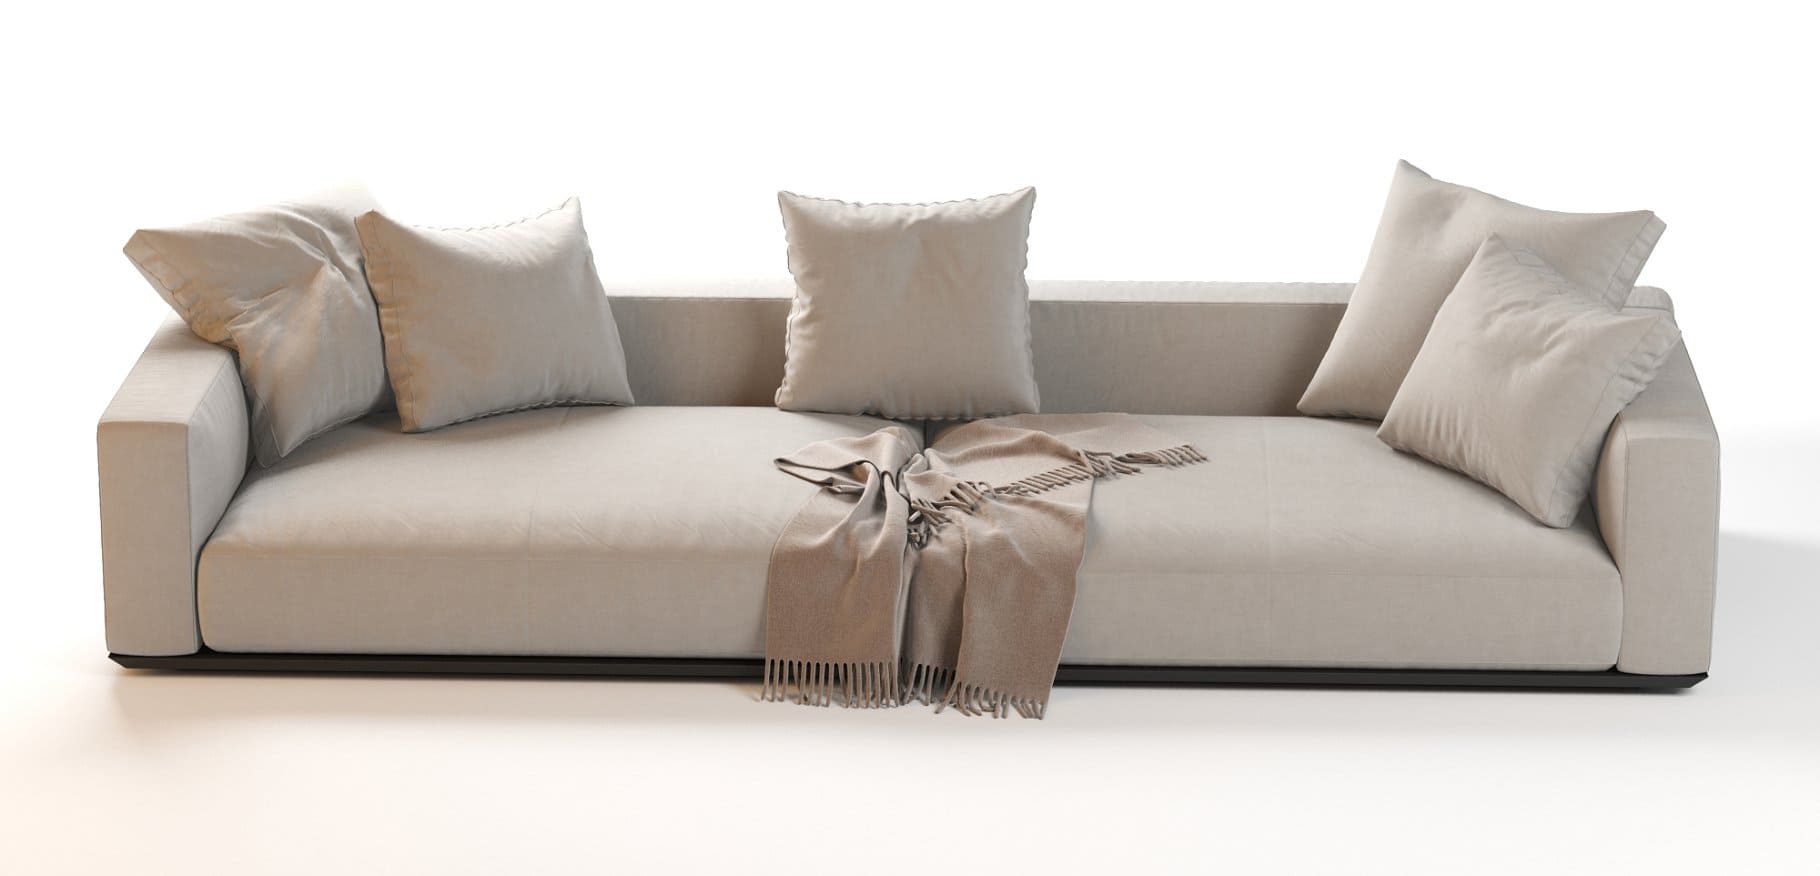 Front view of the Flexform Grandemare Sectional Sofa.